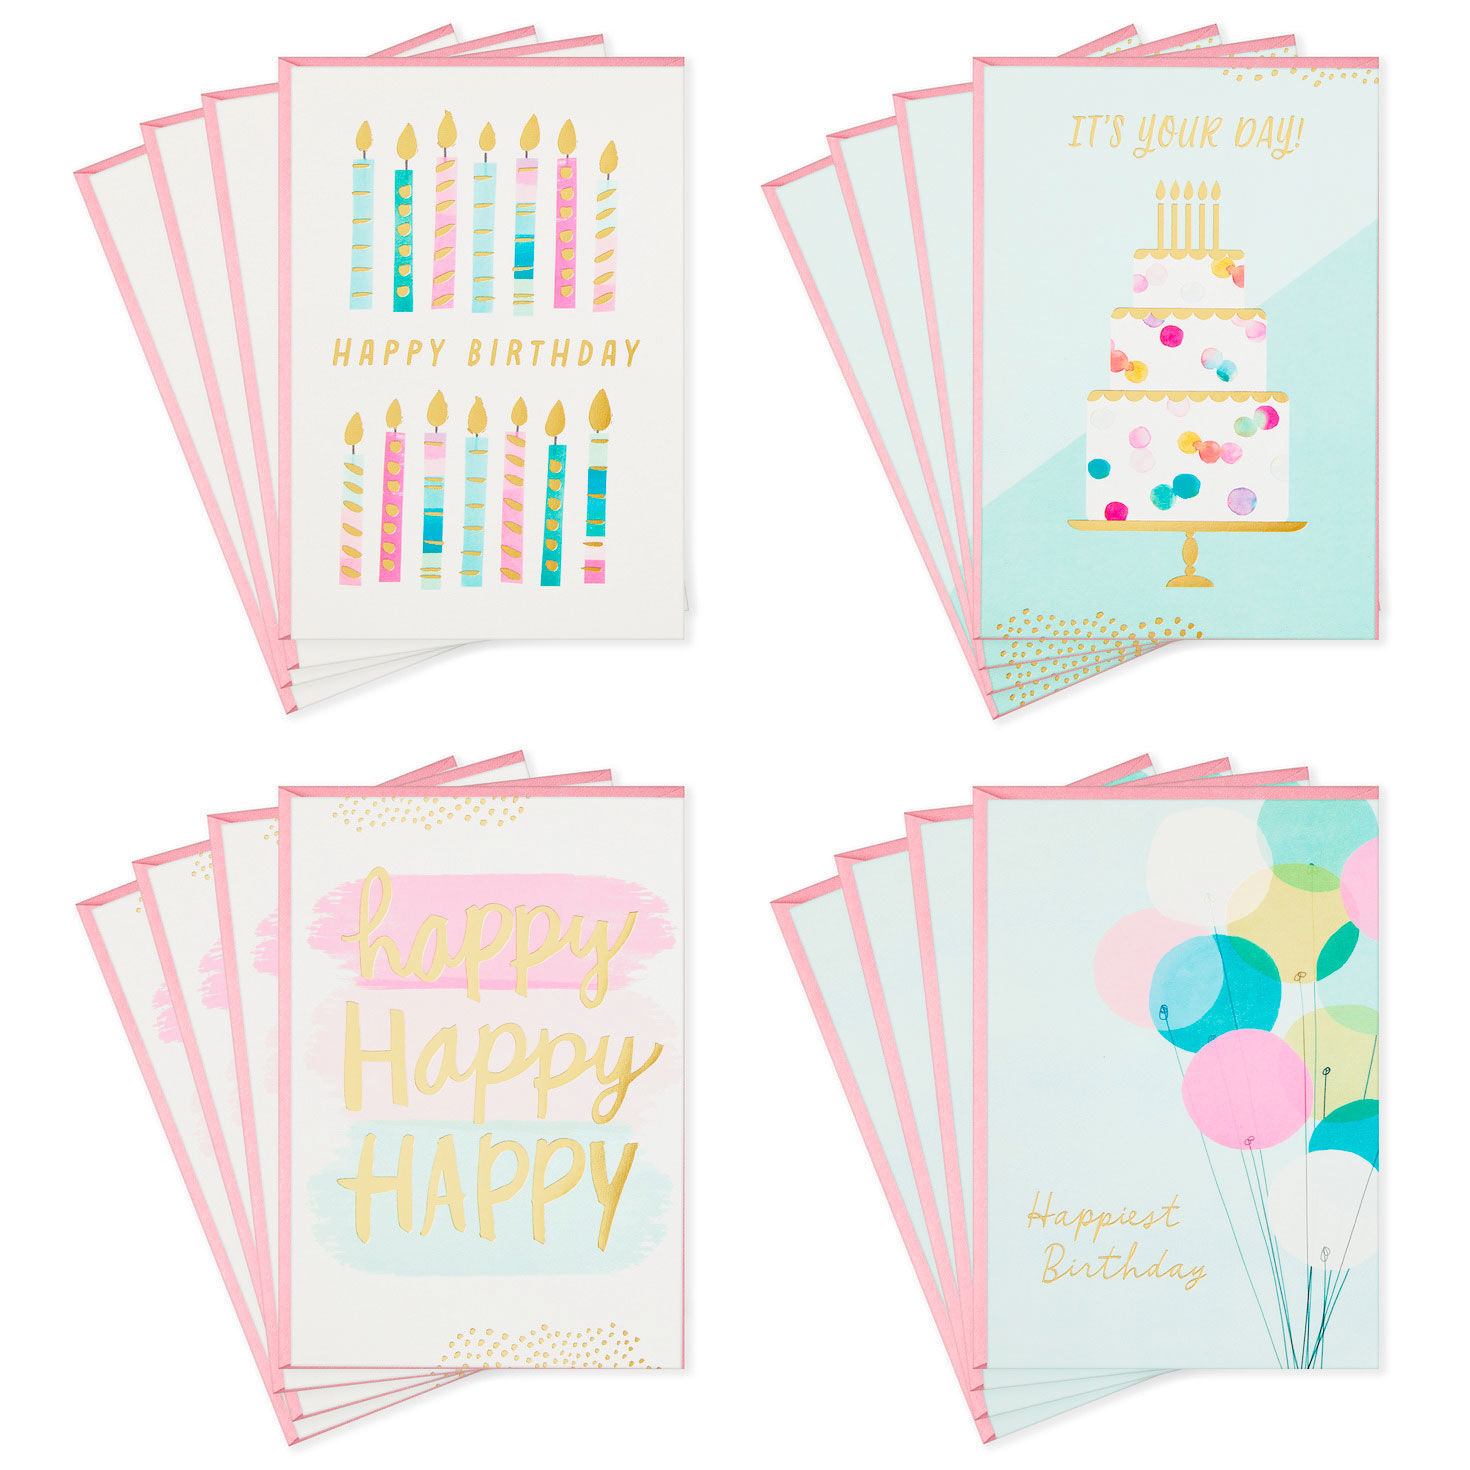 Assorted Pretty Pink and Aqua Boxed Birthday Cards, Pack of 16 for only USD 9.99 | Hallmark